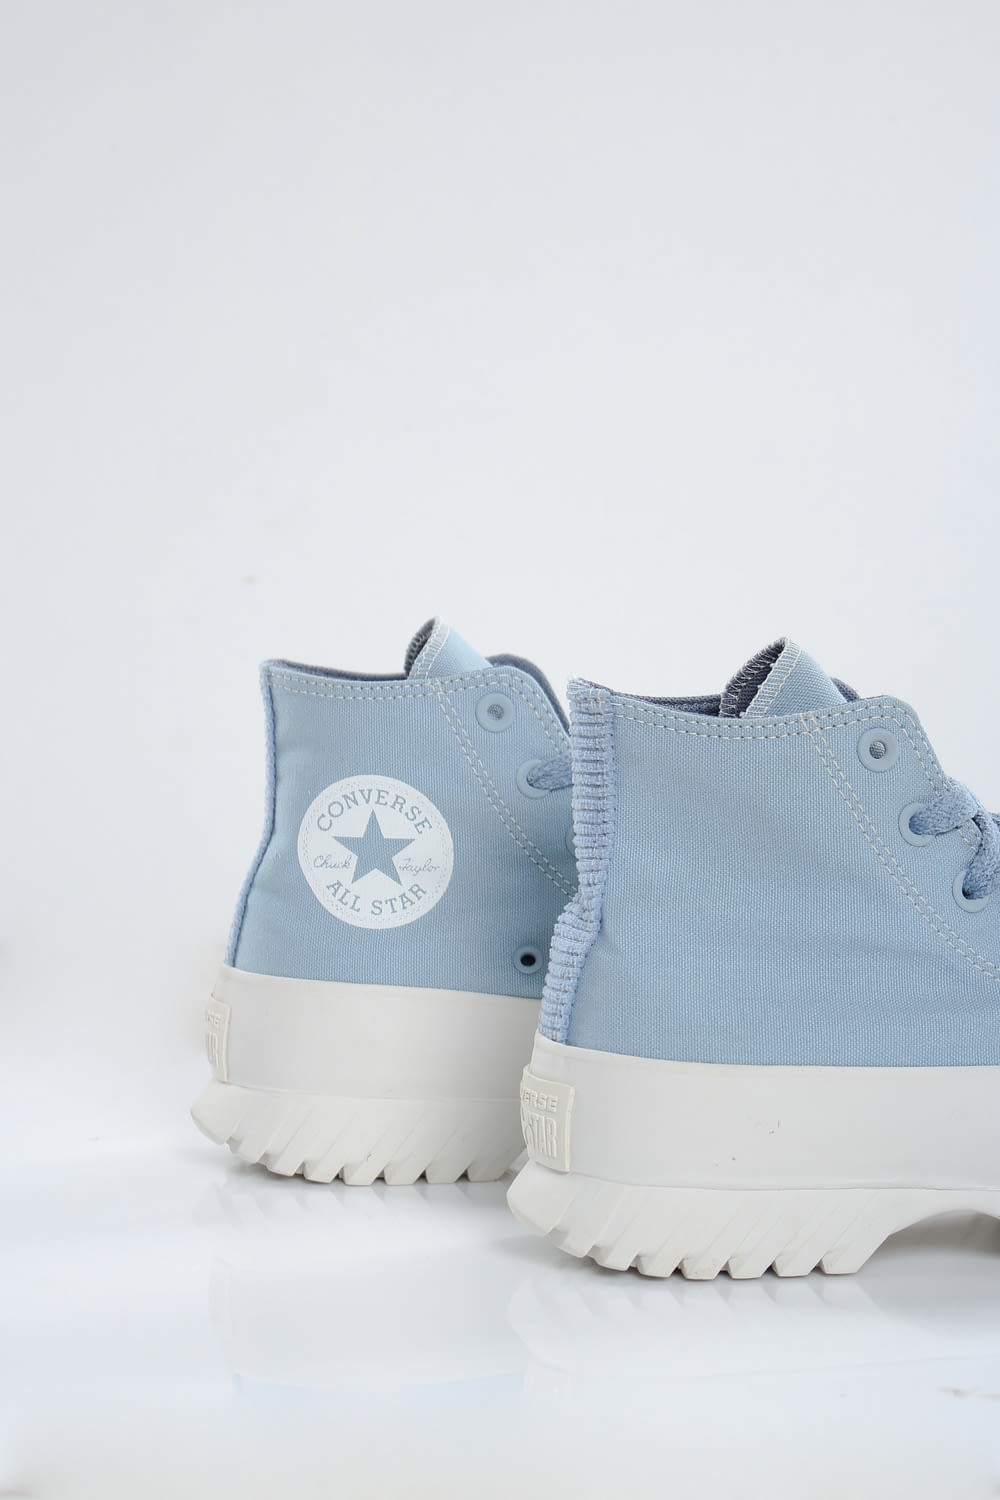 a pair of blue converse sneakers on a white background